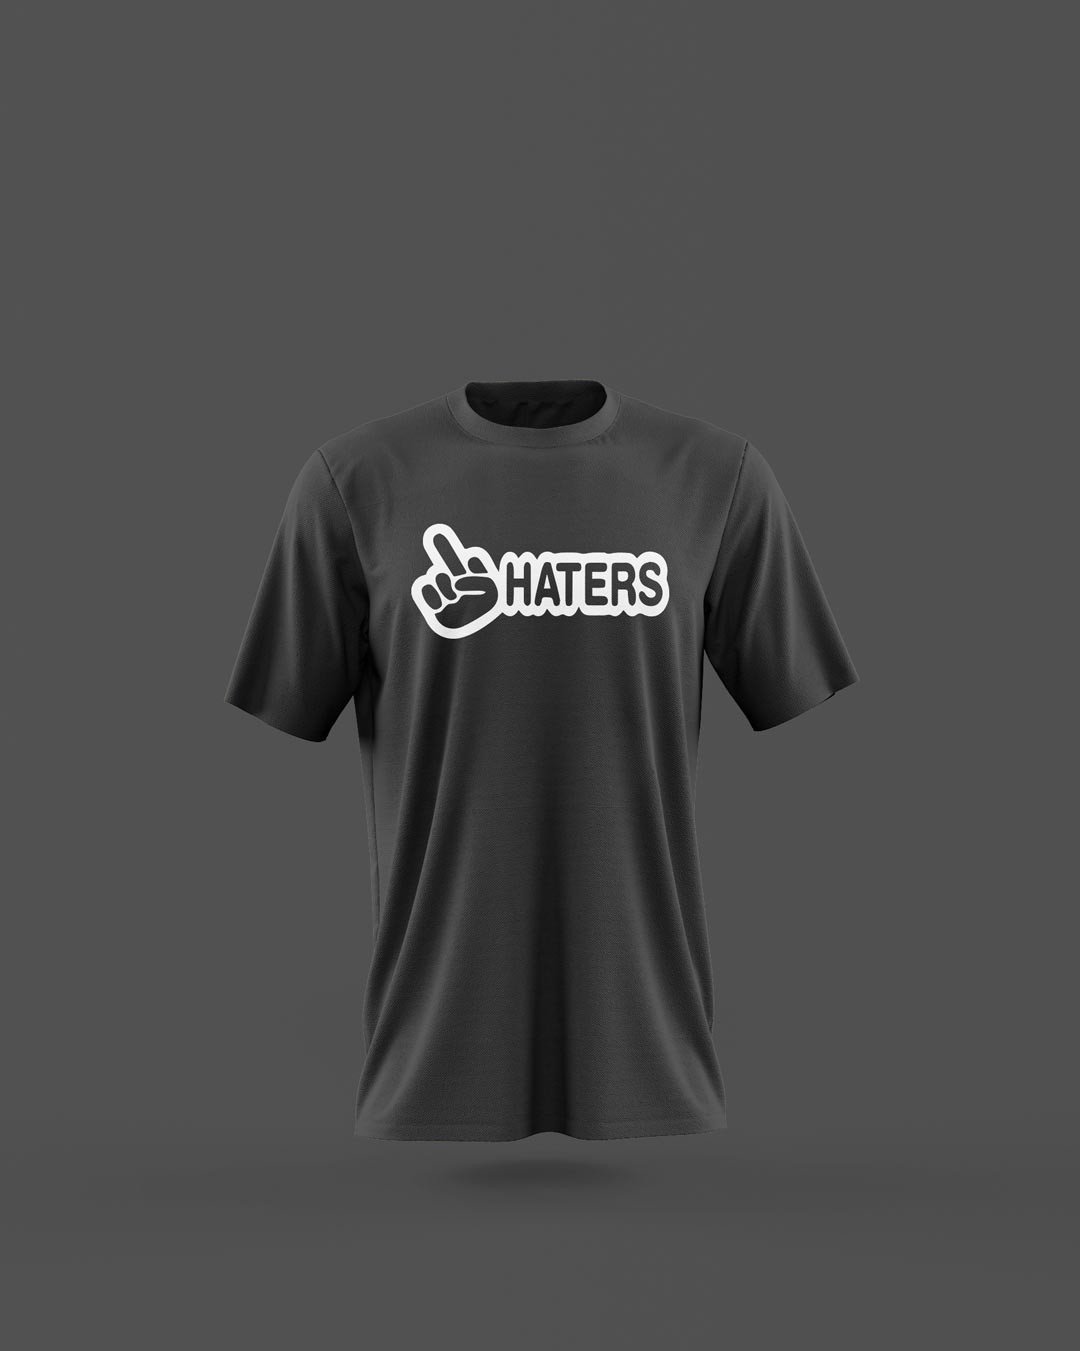 Haters Printed Cotton T-Shirt